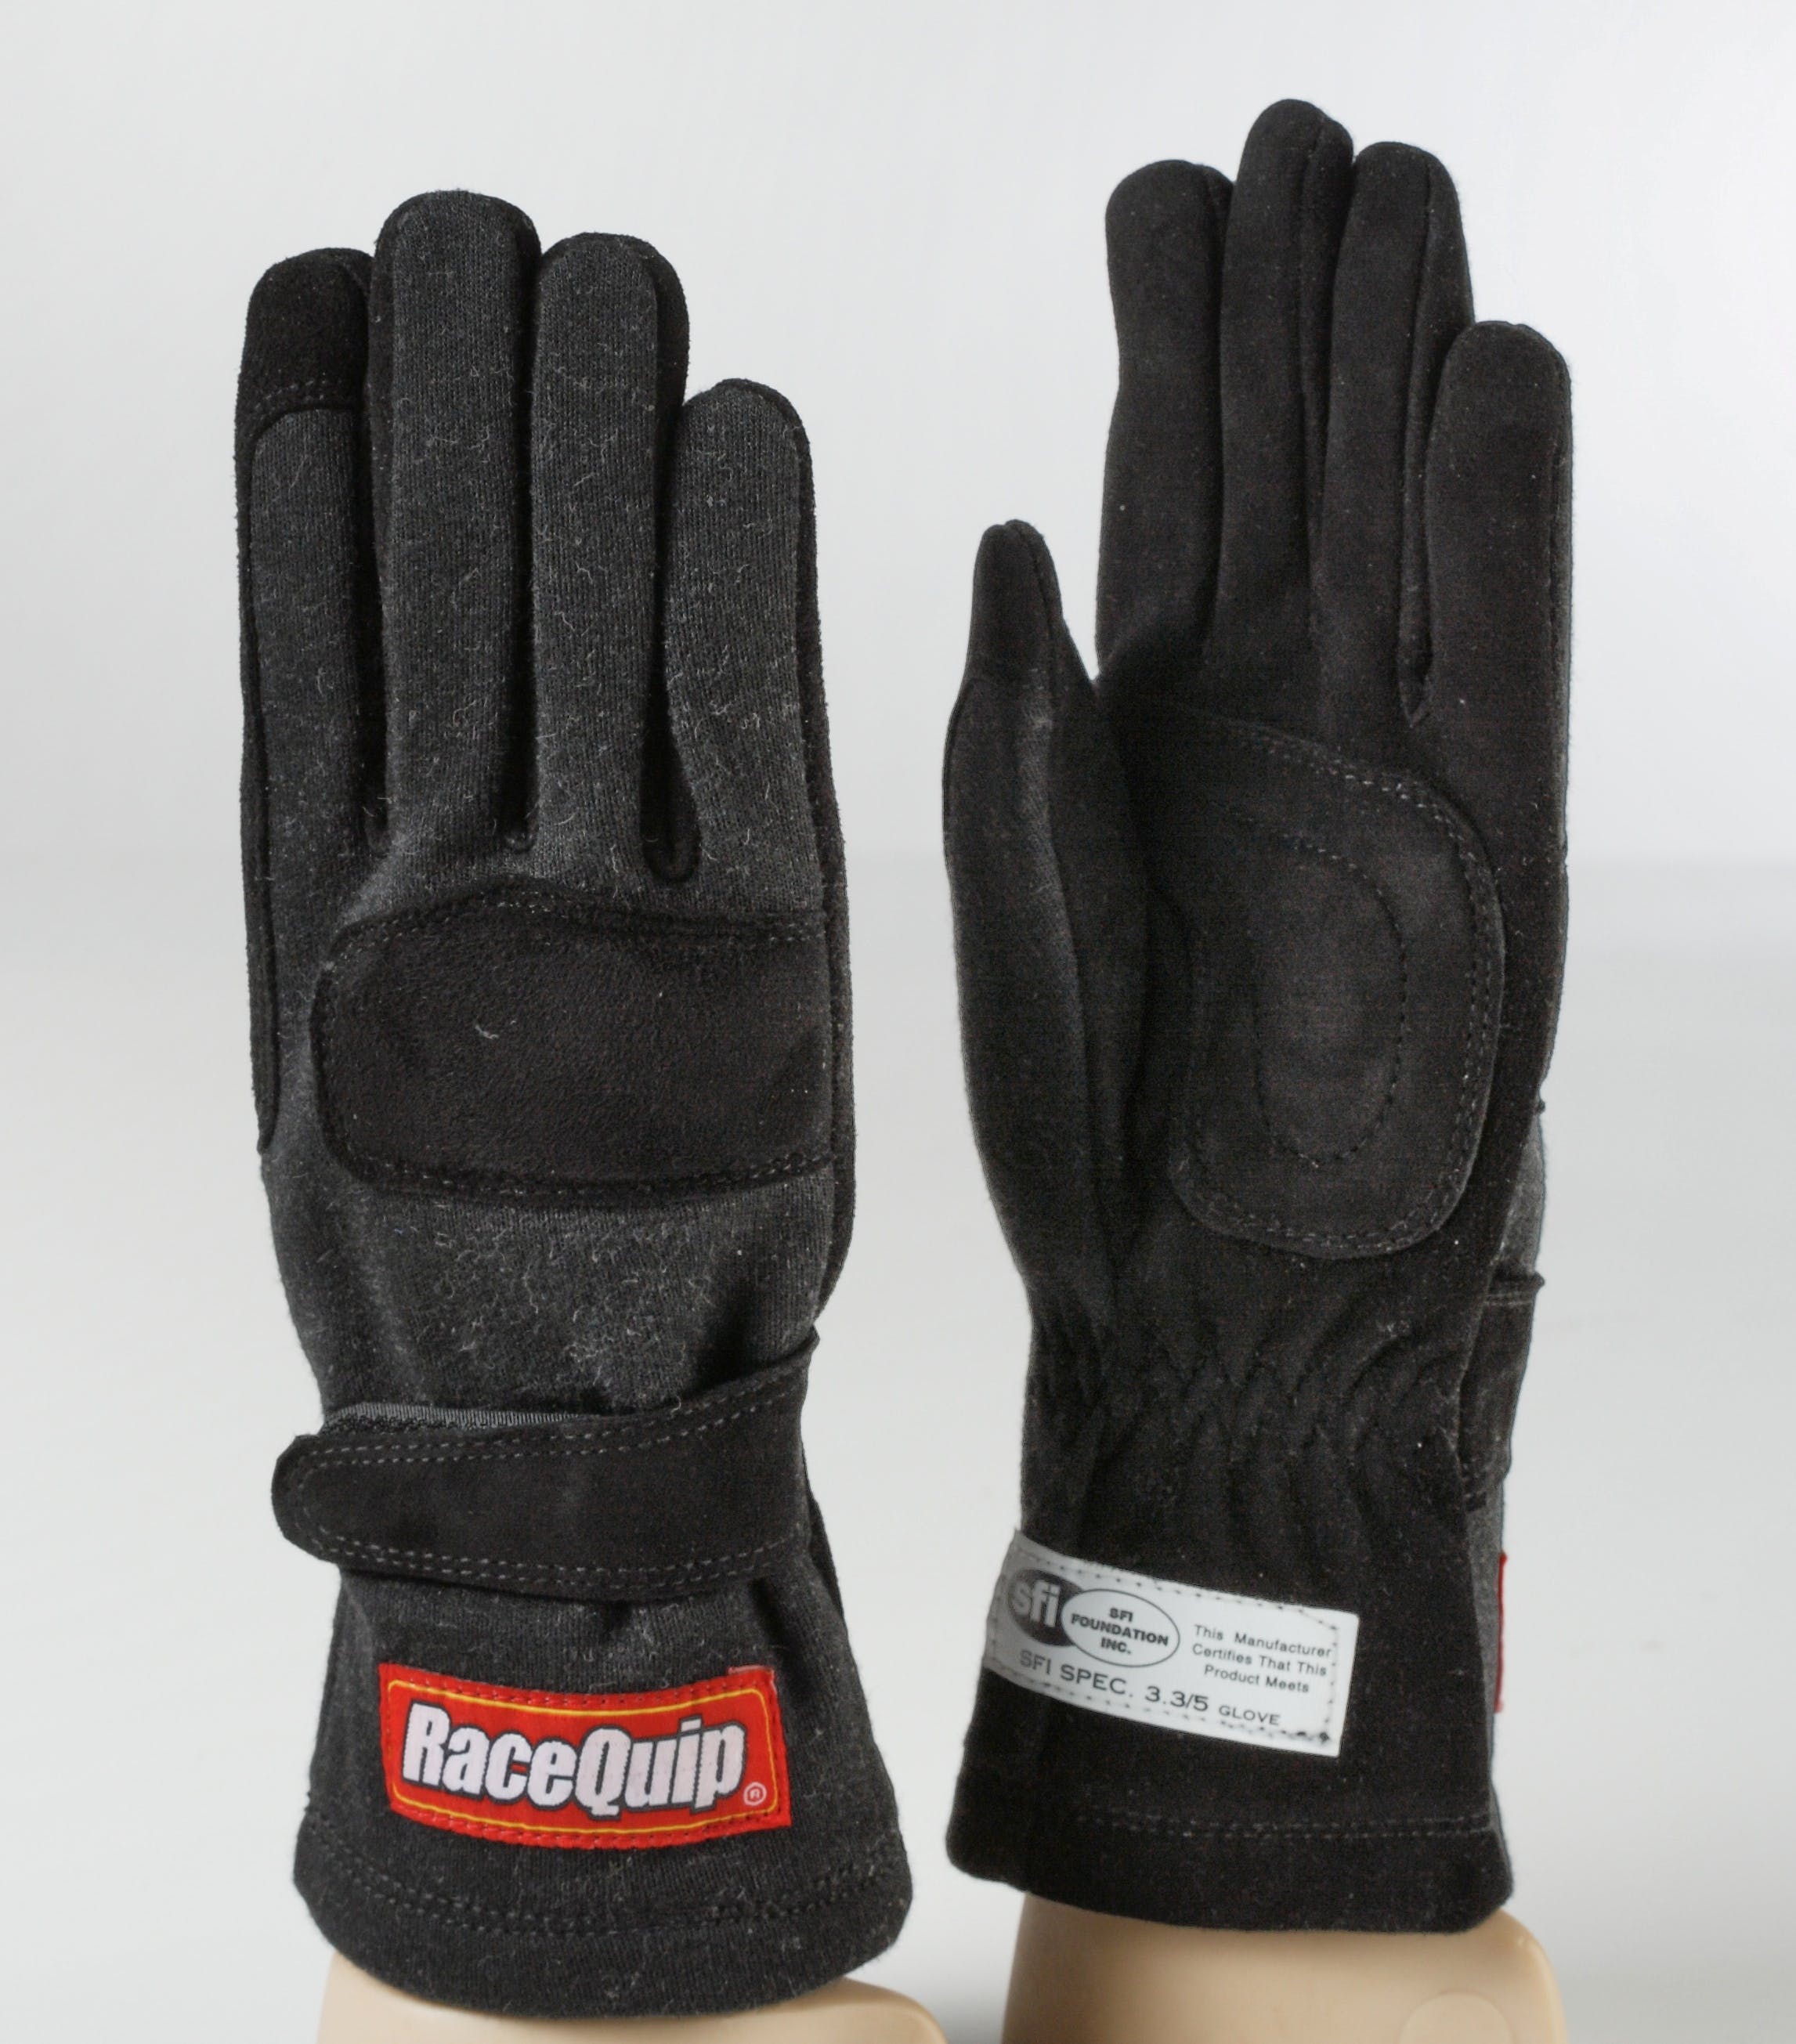 RaceQuip 3550095 SFI-5 Double-Layer Youth Racing Gloves (Black, Large)